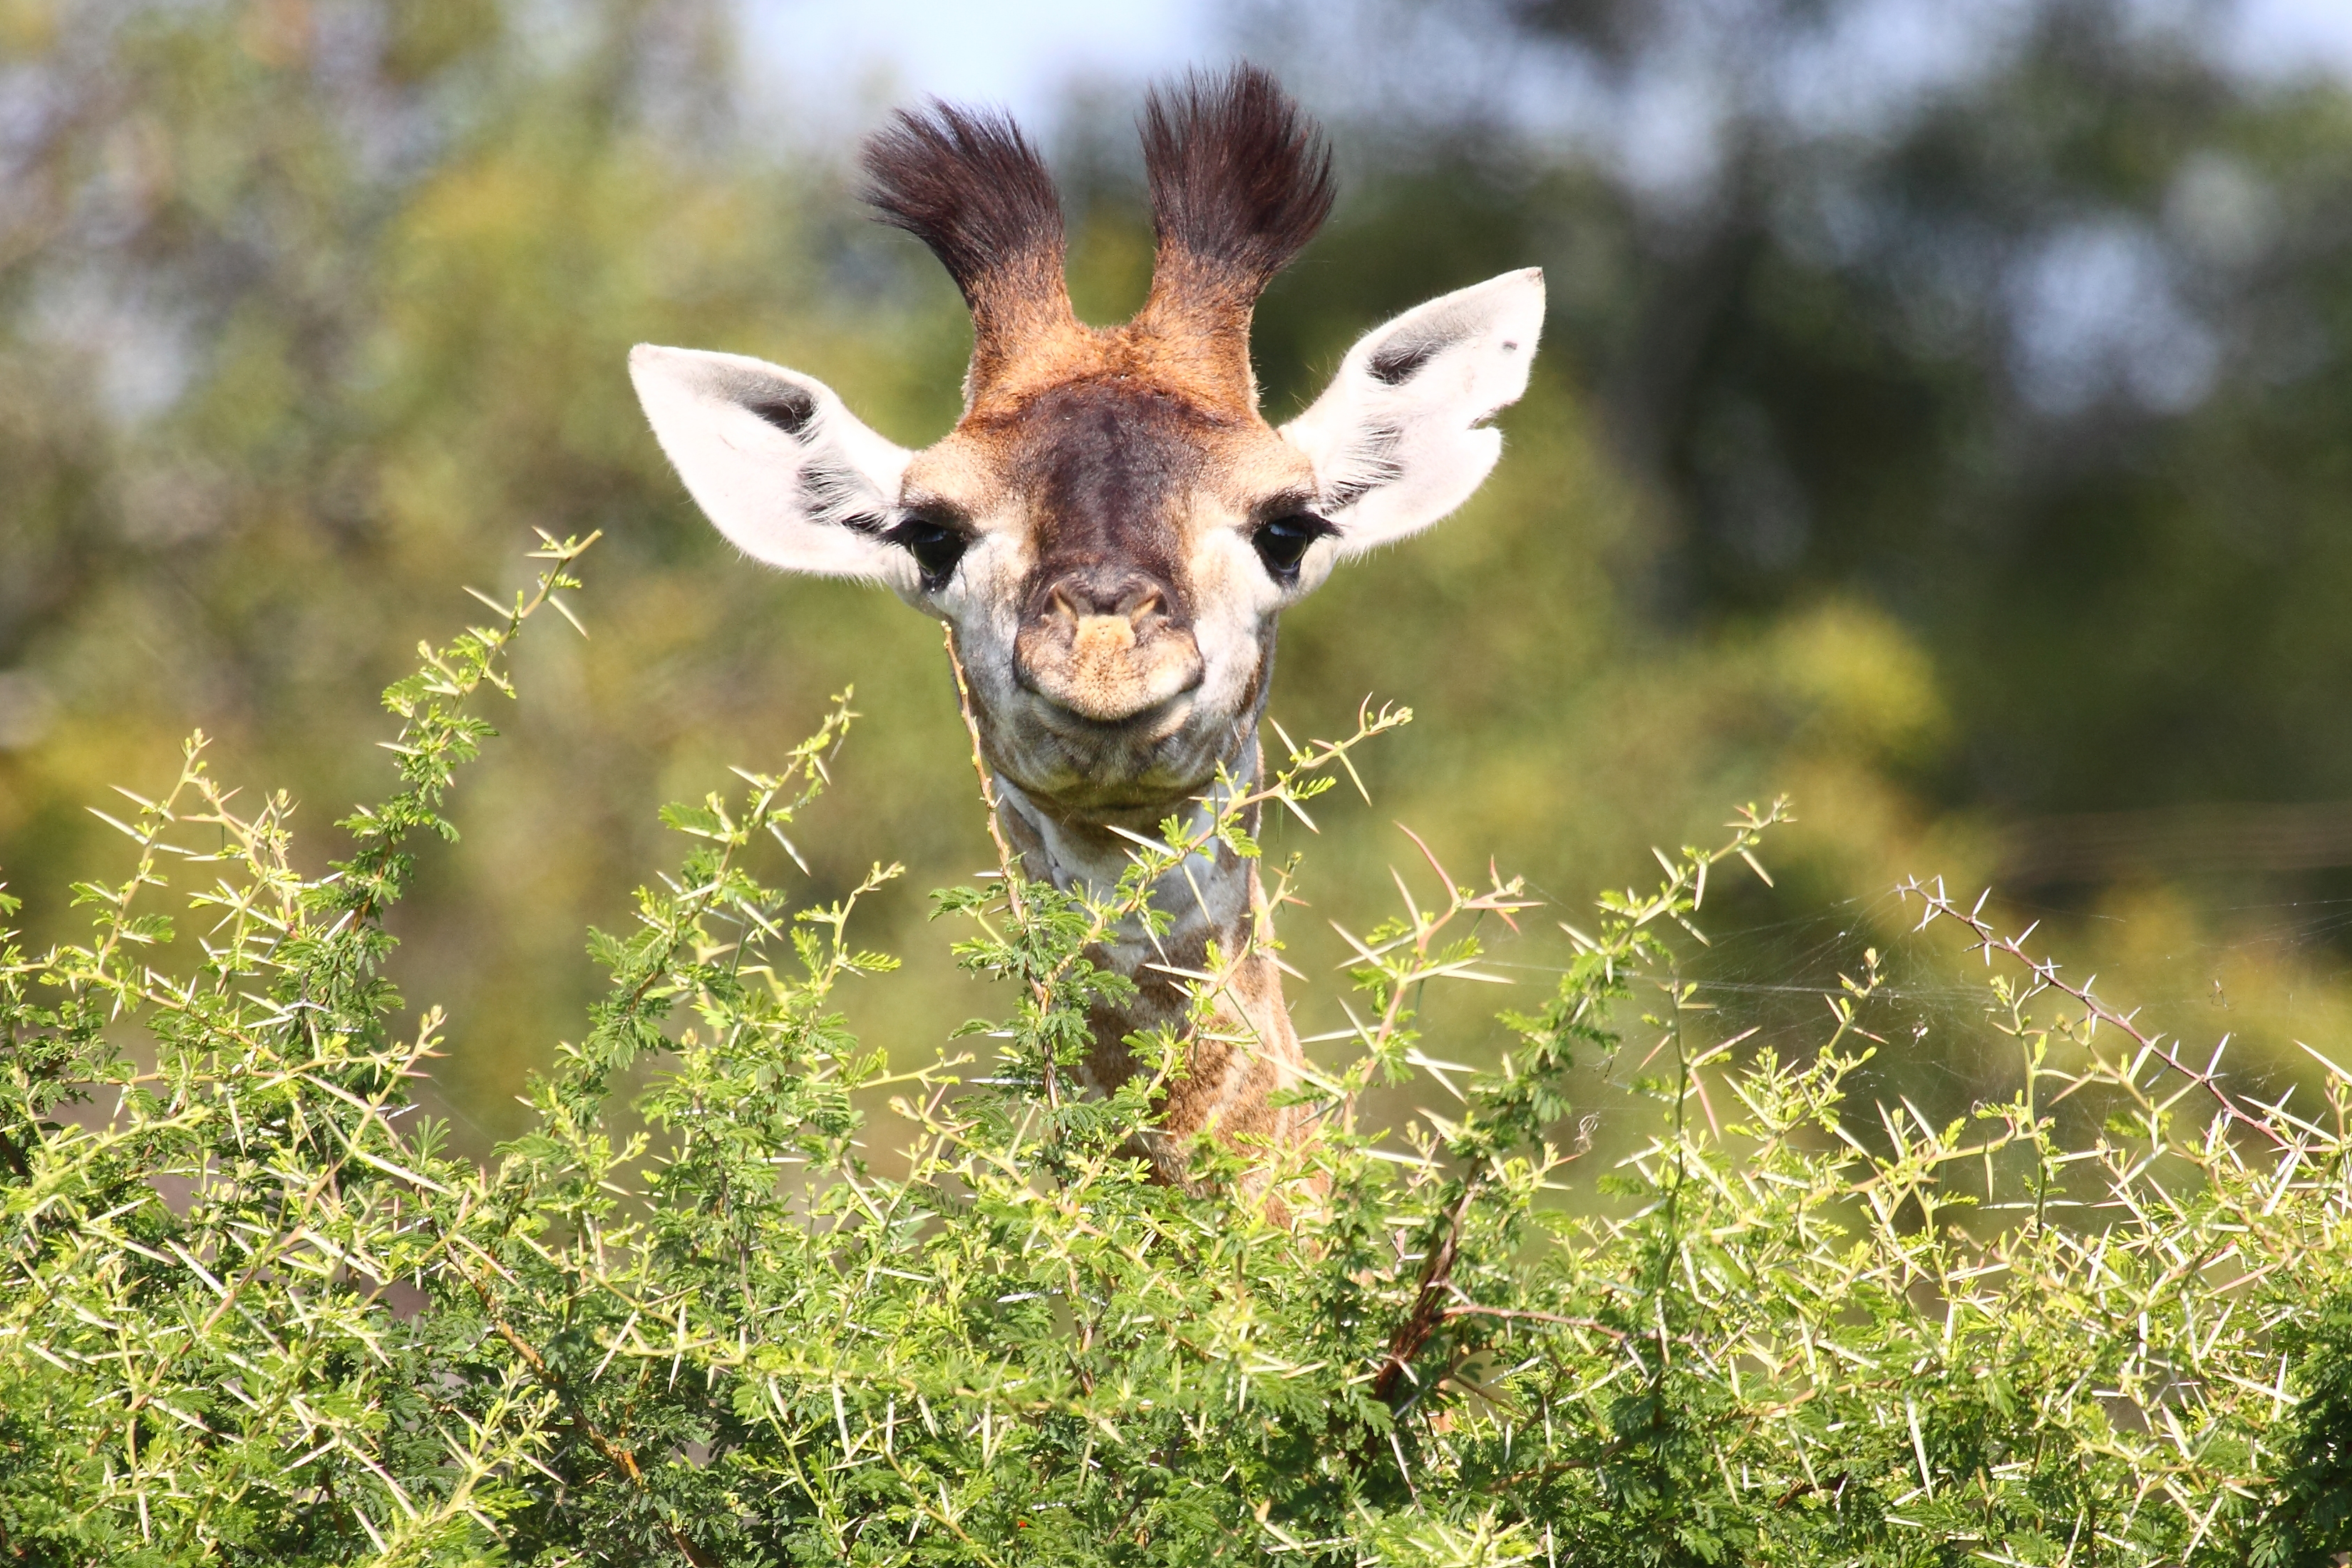 18 giraffe products that are harming the population